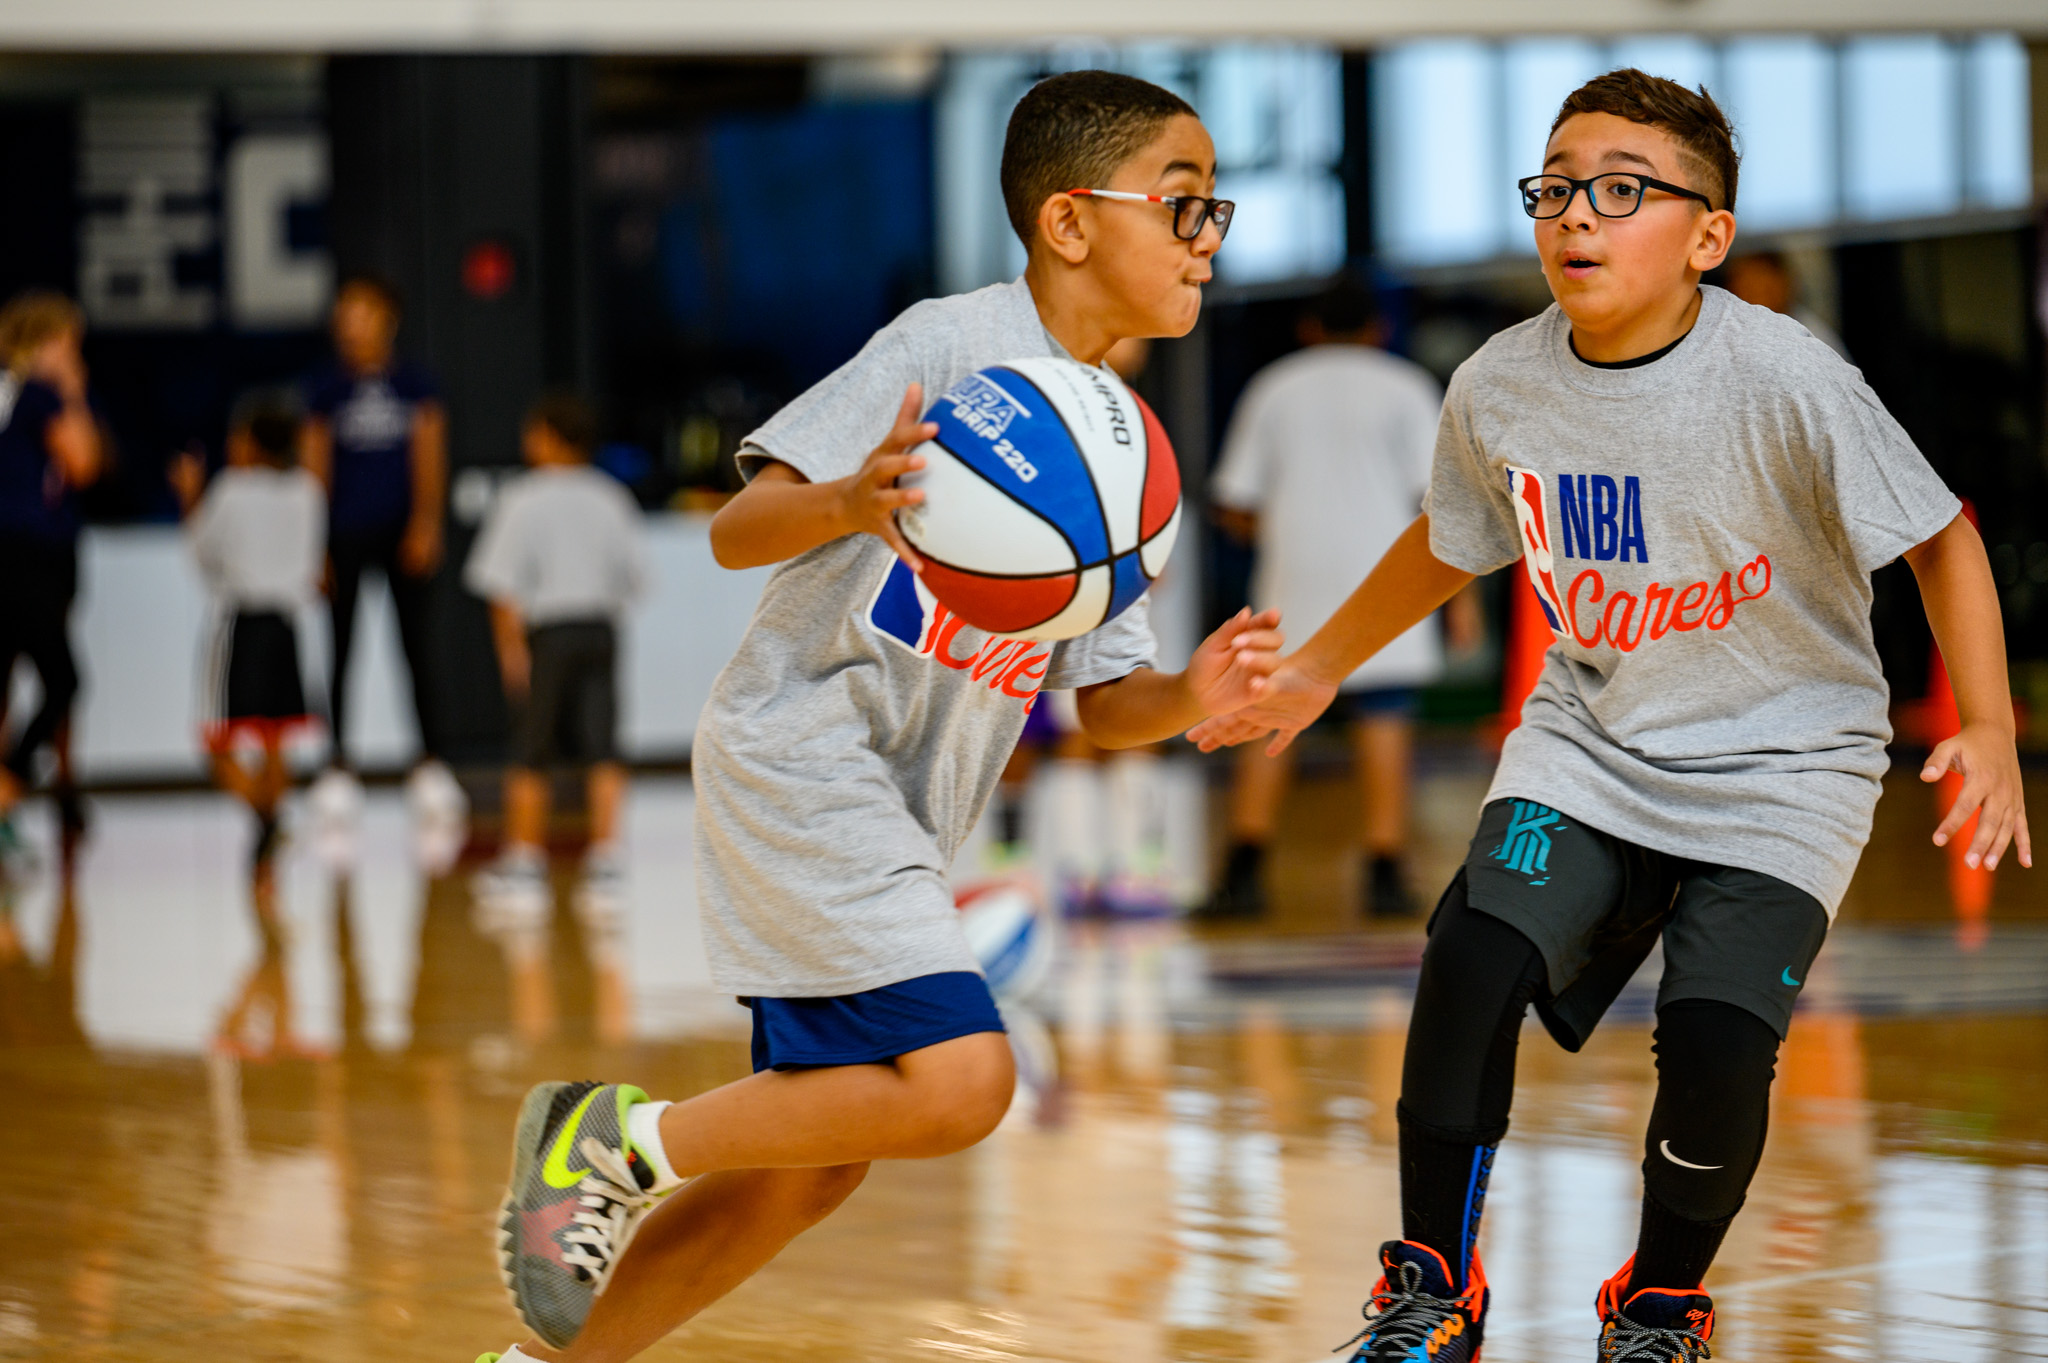 Youth participants of The Erving Clinic presented by The 76ers, Toyota and Jefferson enjoyed a special day at the Sixers Practice Facility on September 7